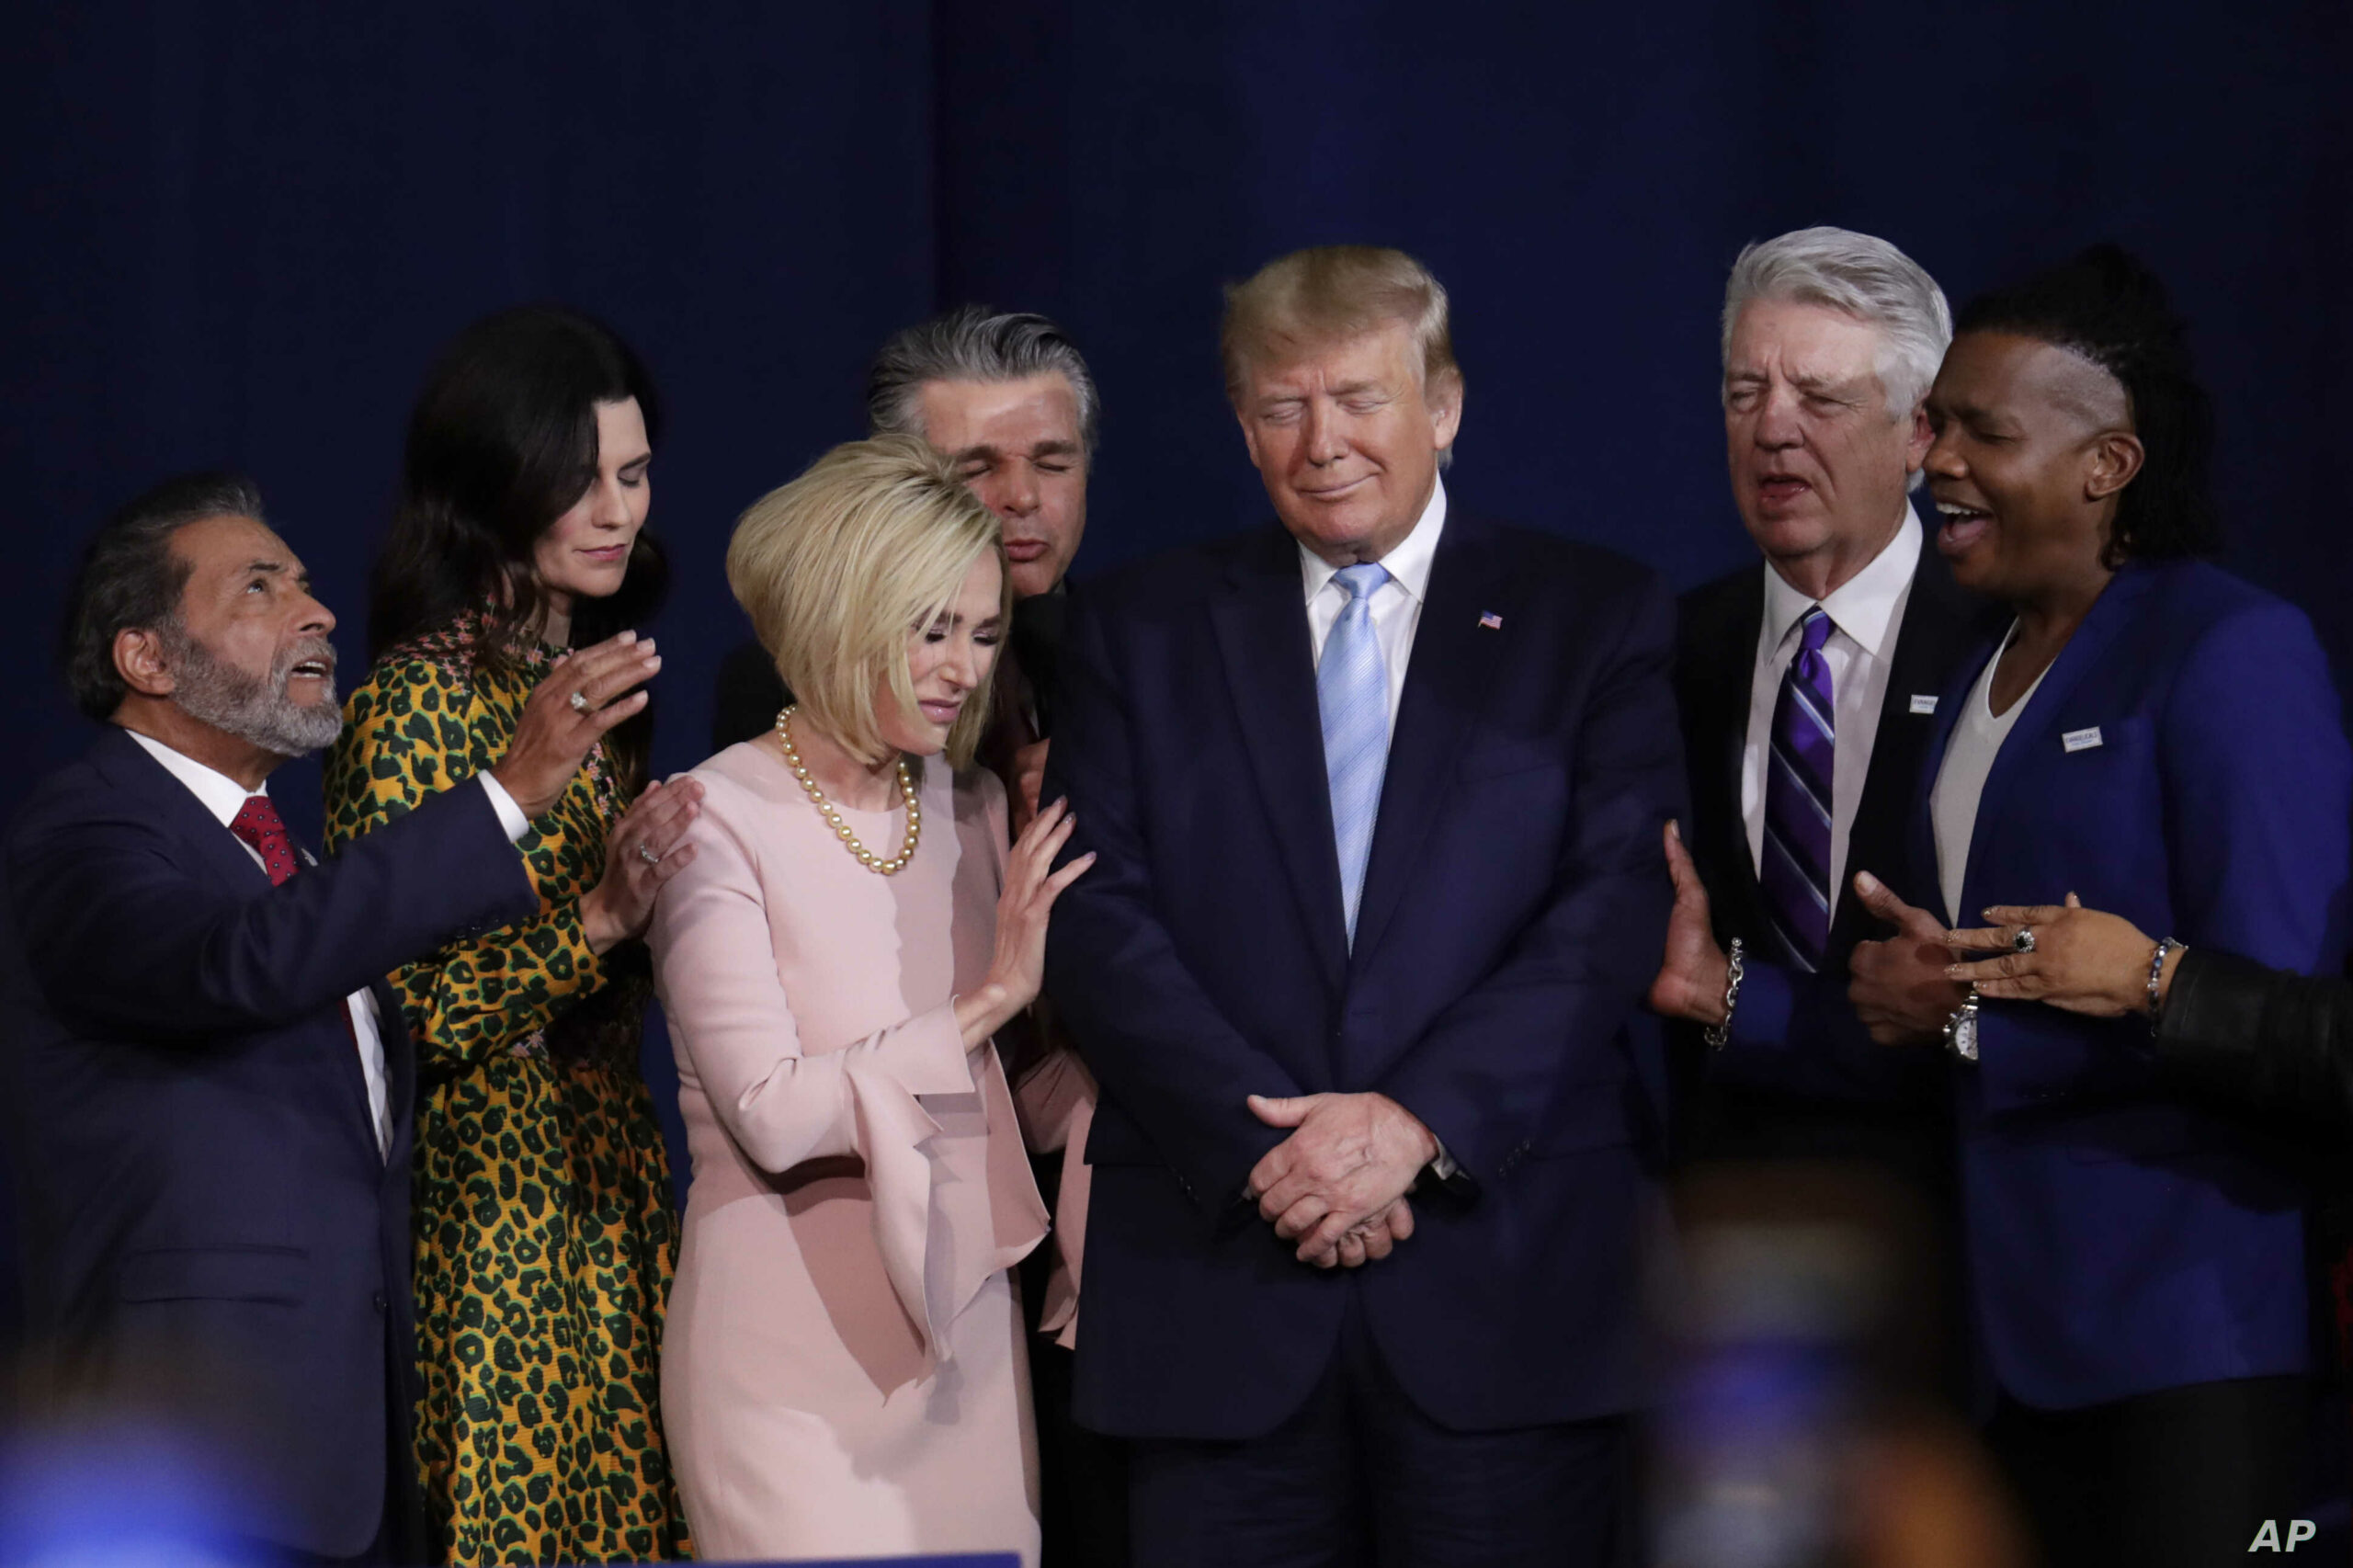 Far-right evangelicals excused sexual abuse long before Donald Trump